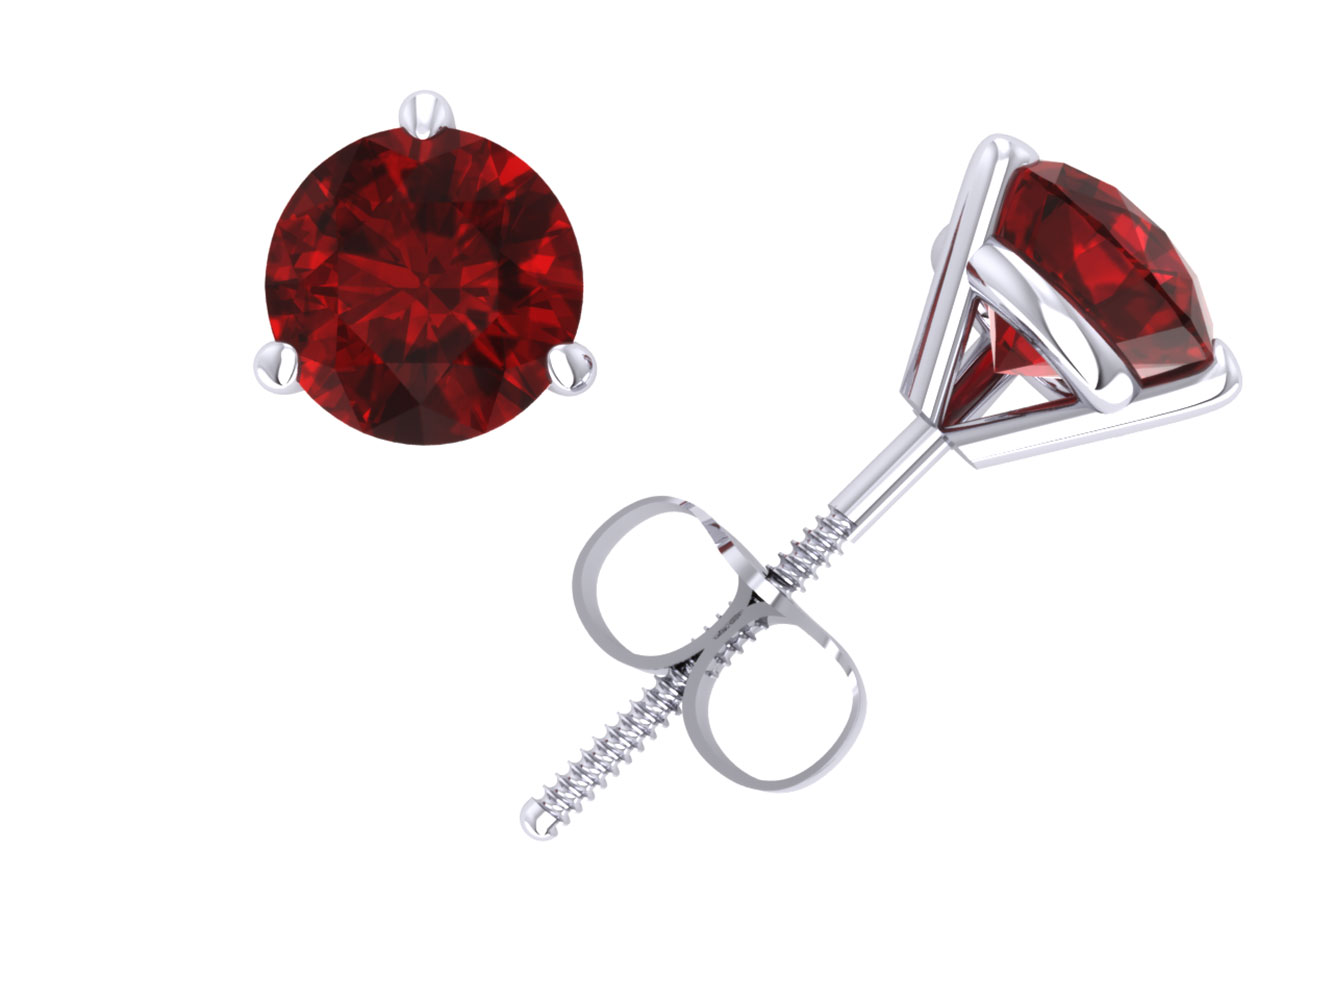 Jewel We Sell Genuine 1.00Ct Round Ruby Martini Stud Earrings 14k White or Yellow Gold Prong ScrewBack Commercial Quality